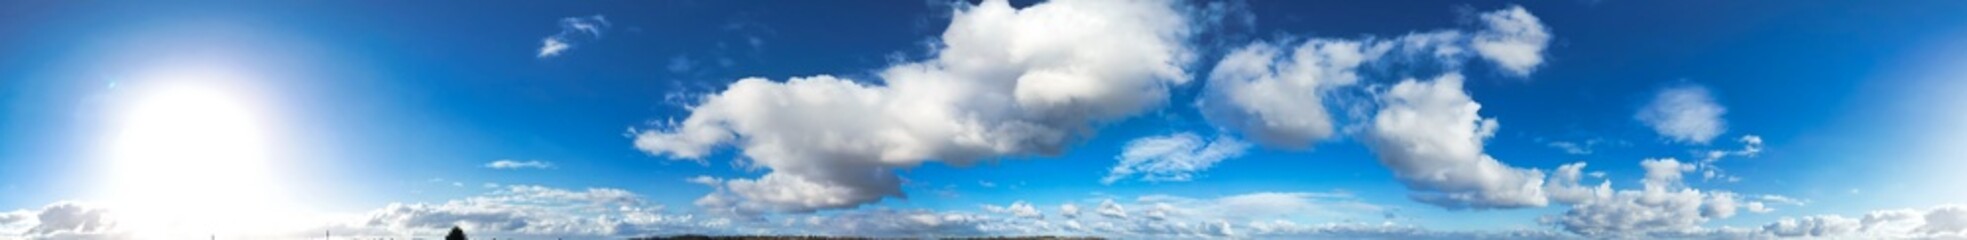 High Angle Panoramic View of Winter Sky and Clouds over City of England UK